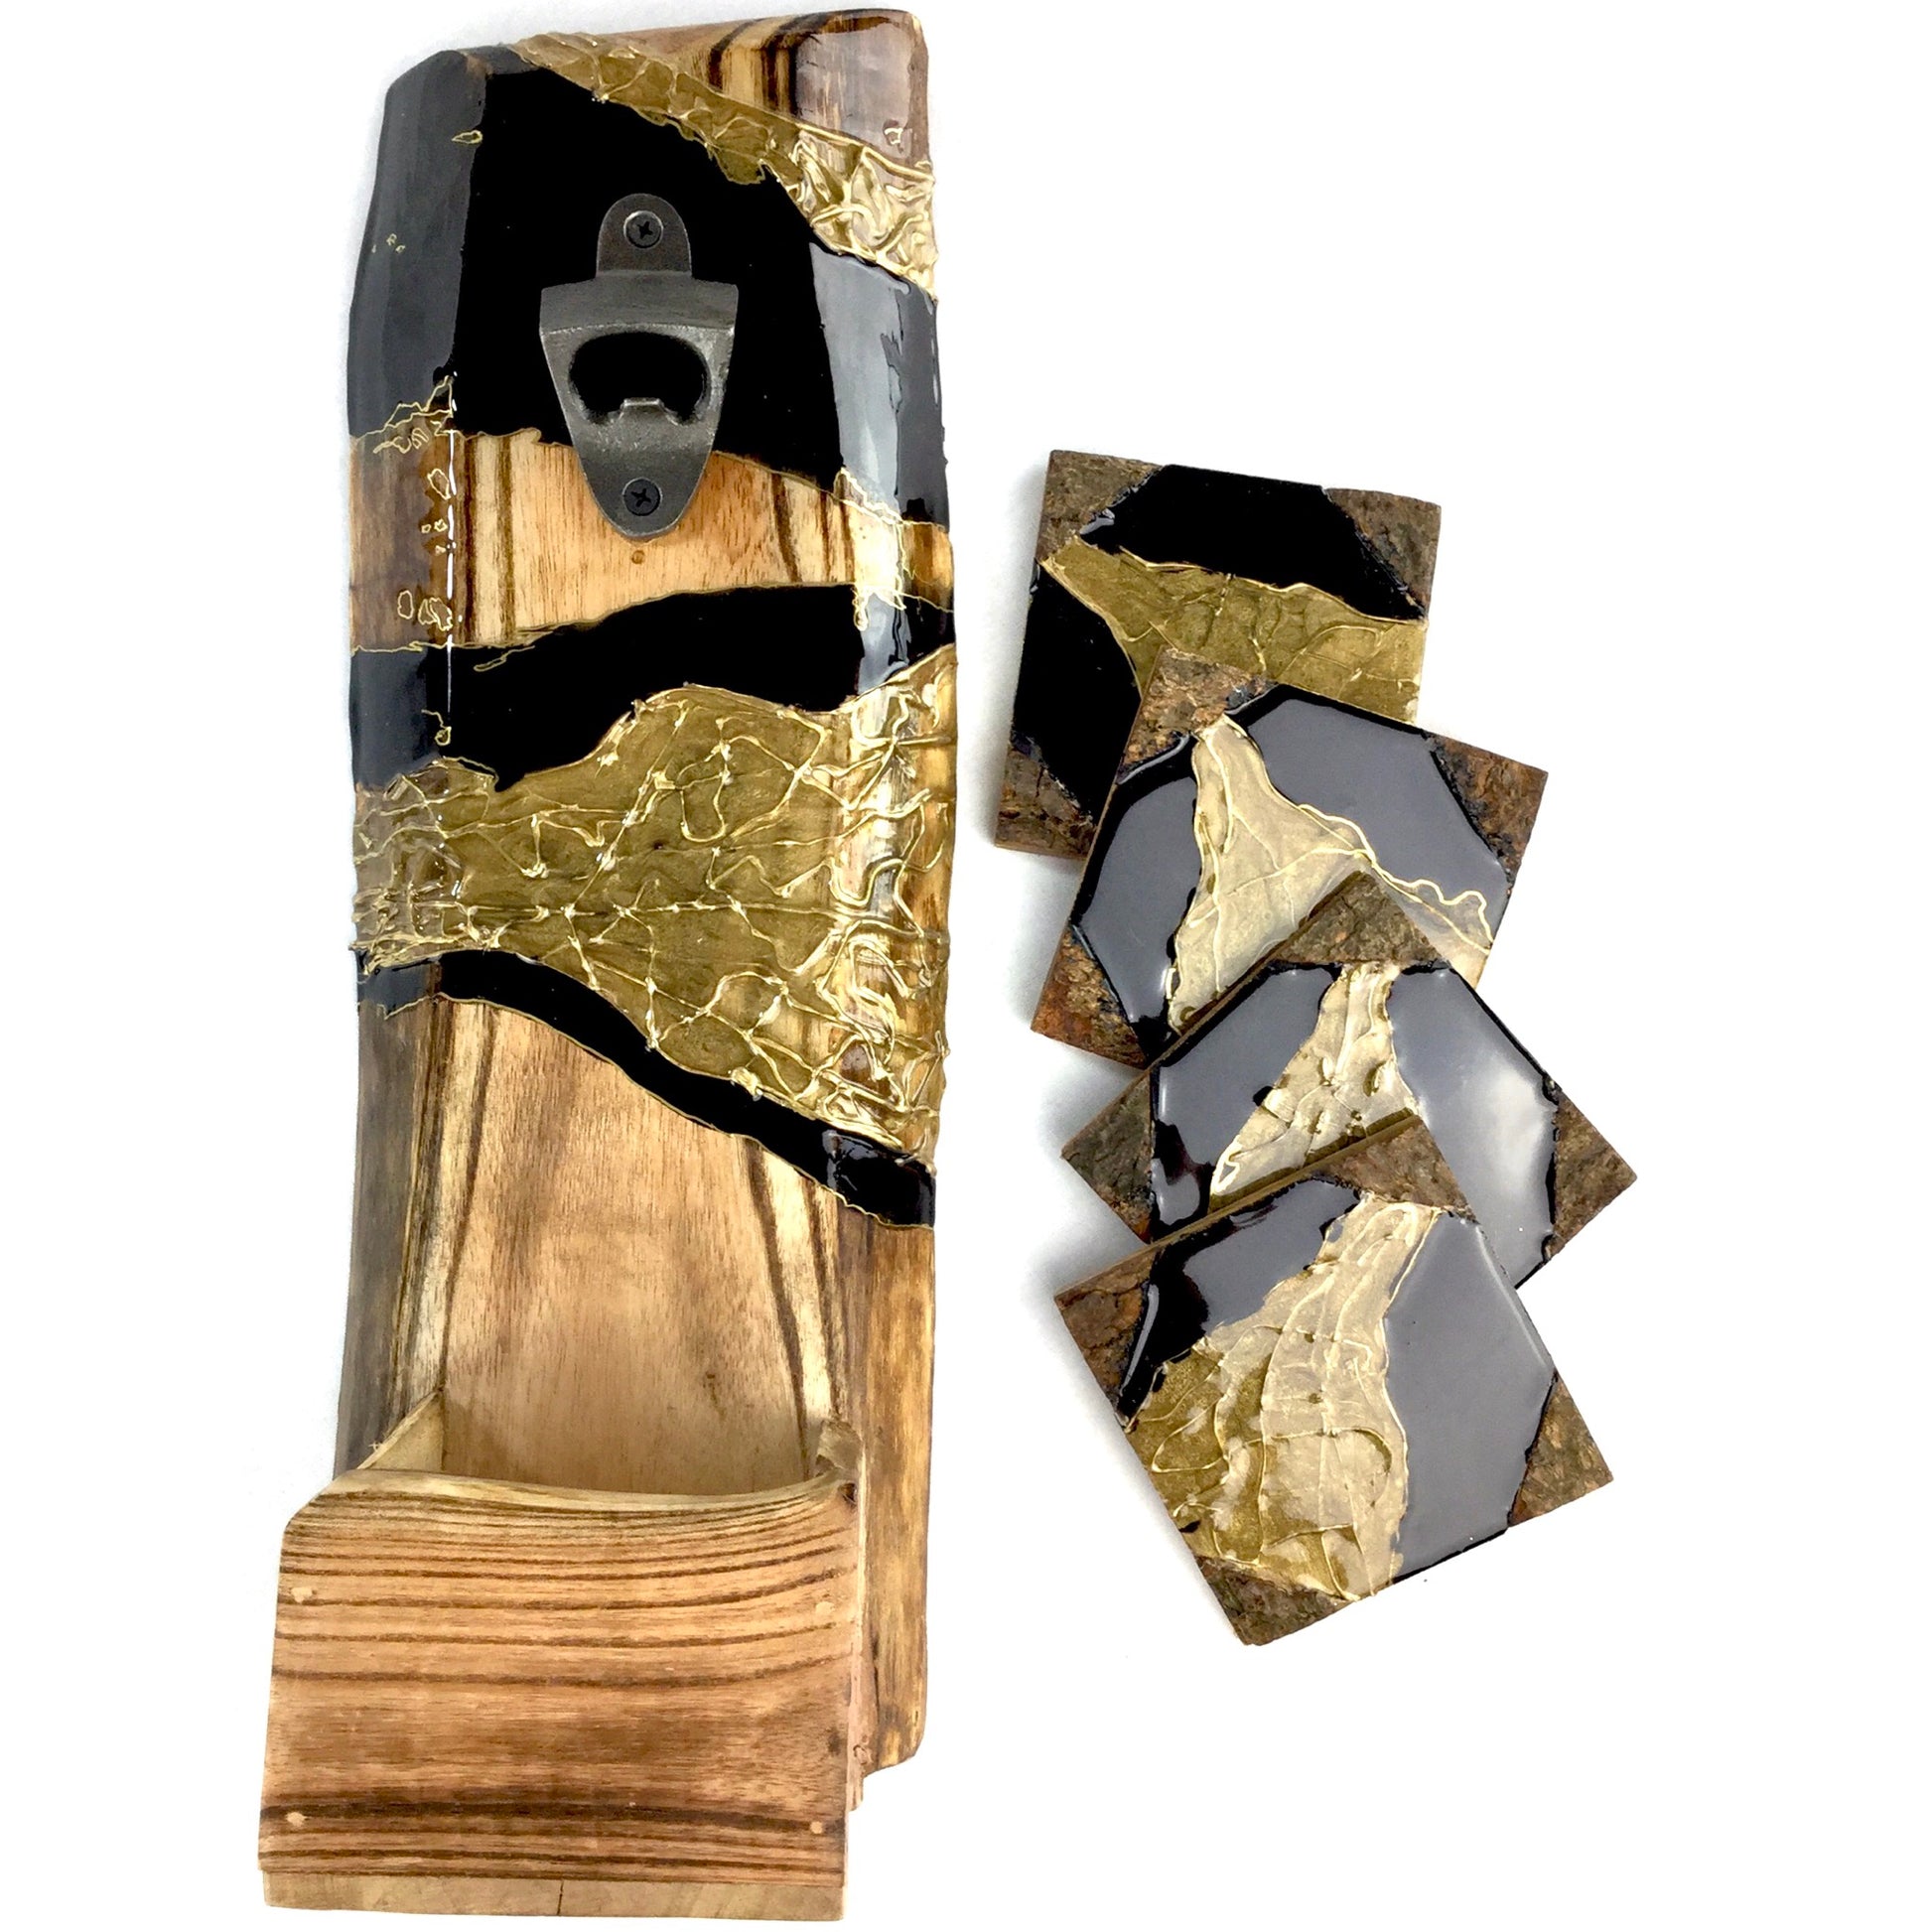 Wooden Bottle Opener with Cap Catch in Black and Gold Abstract Design with matching coasters - Mamota Creative